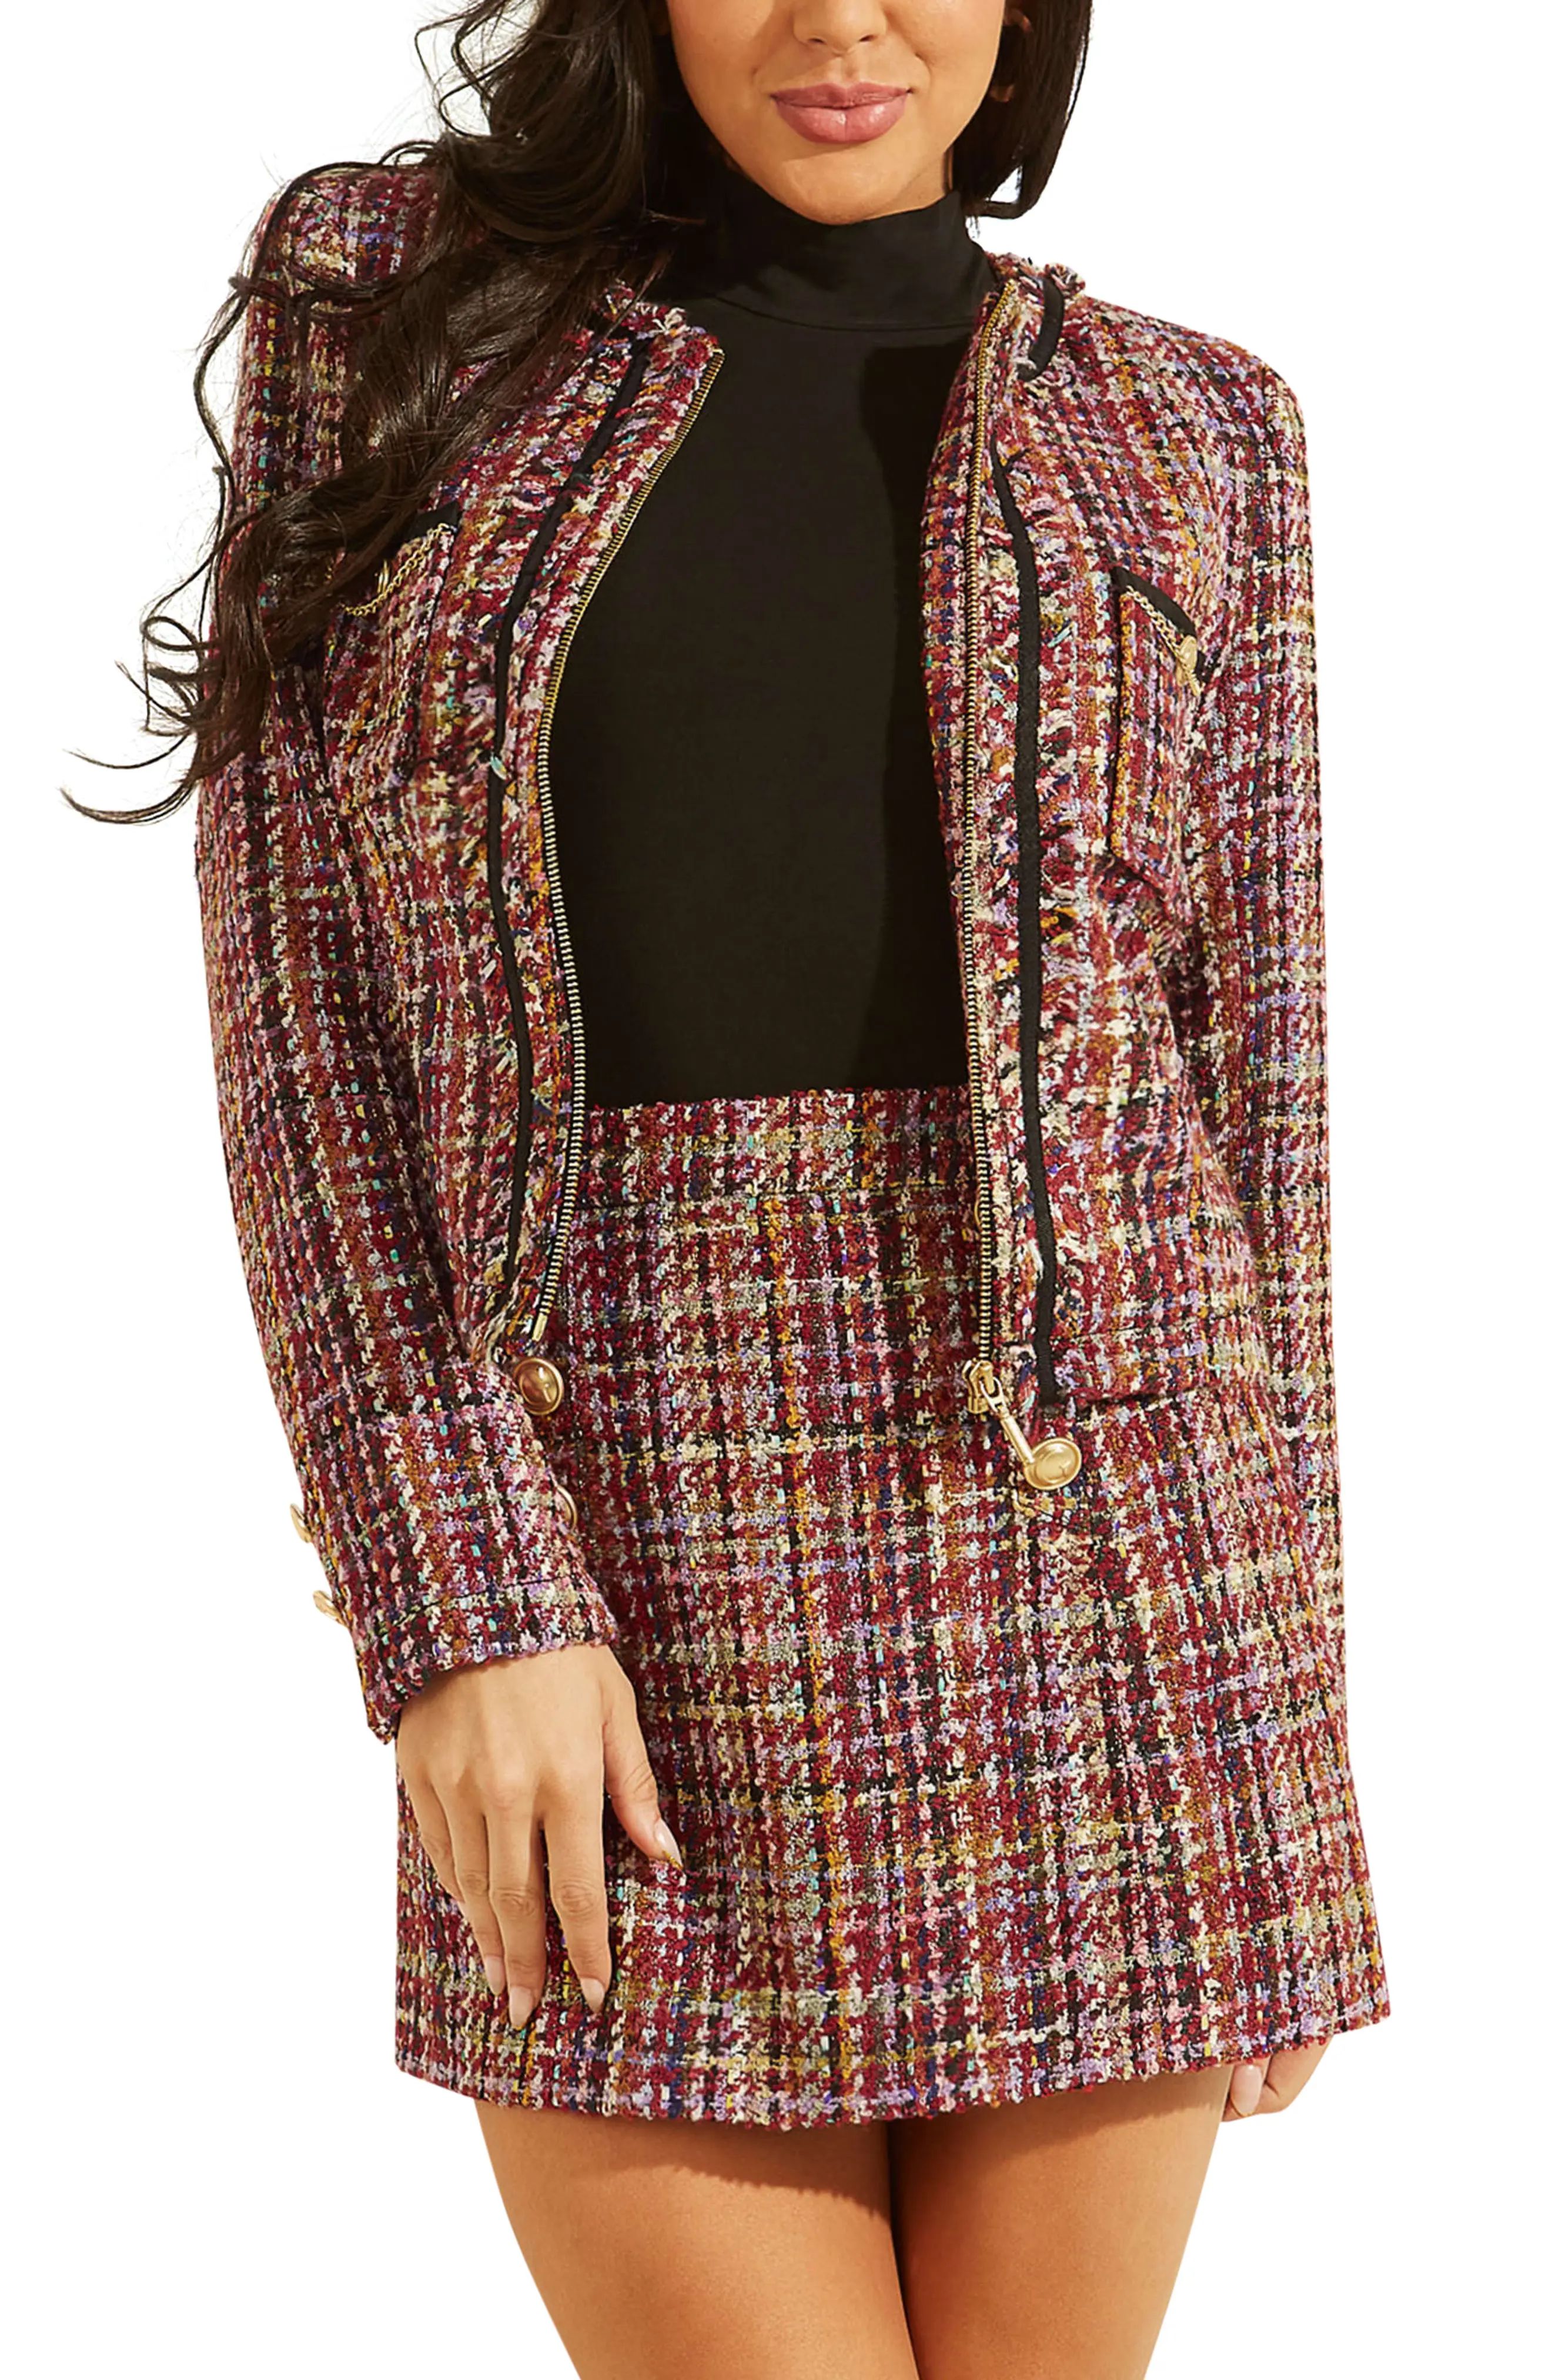 GUESS Mikaela Tweed Jacket, Size Large in Ruby Merlot Multi at Nordstrom | Nordstrom